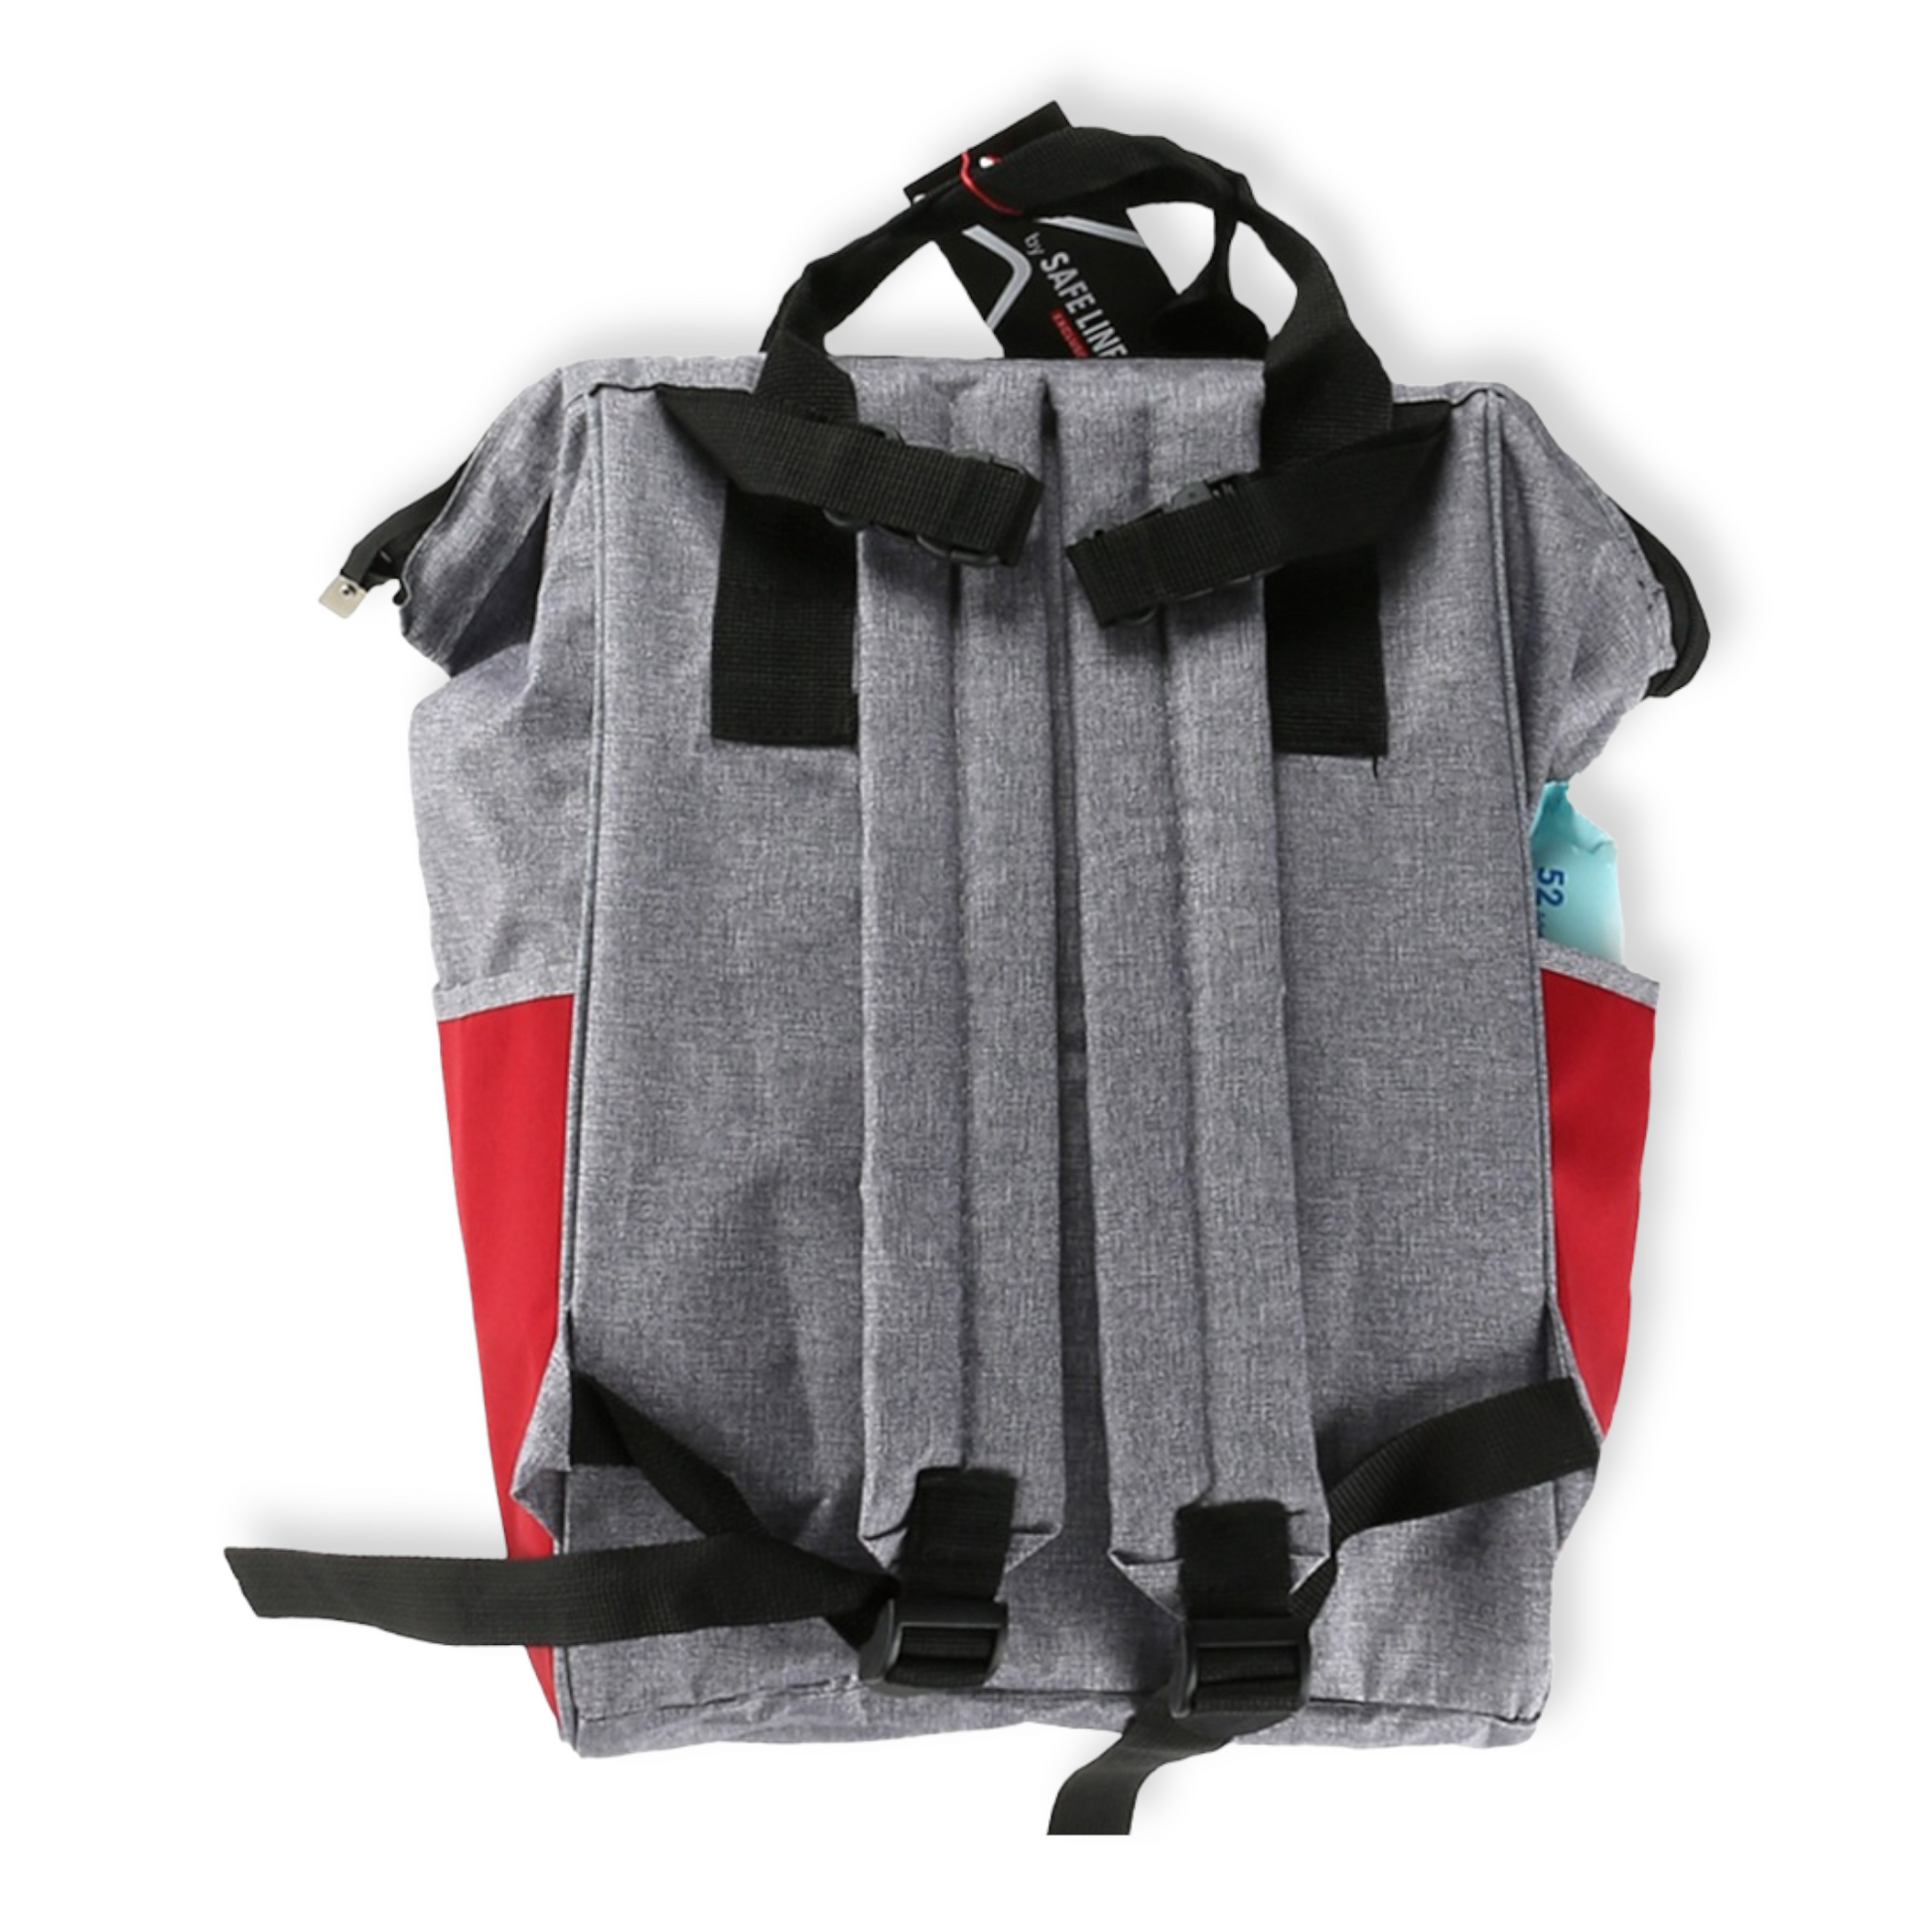 Red and Grey Mommy Bag-Bag, Bags, catbabygear, catbag, Changing, Diapers, Grey, Maternity, Nappy, Nursery, Red, Travel-Safe Line-[Too Twee]-[Tootwee]-[baby]-[newborn]-[clothes]-[essentials]-[toys]-[Lebanon]